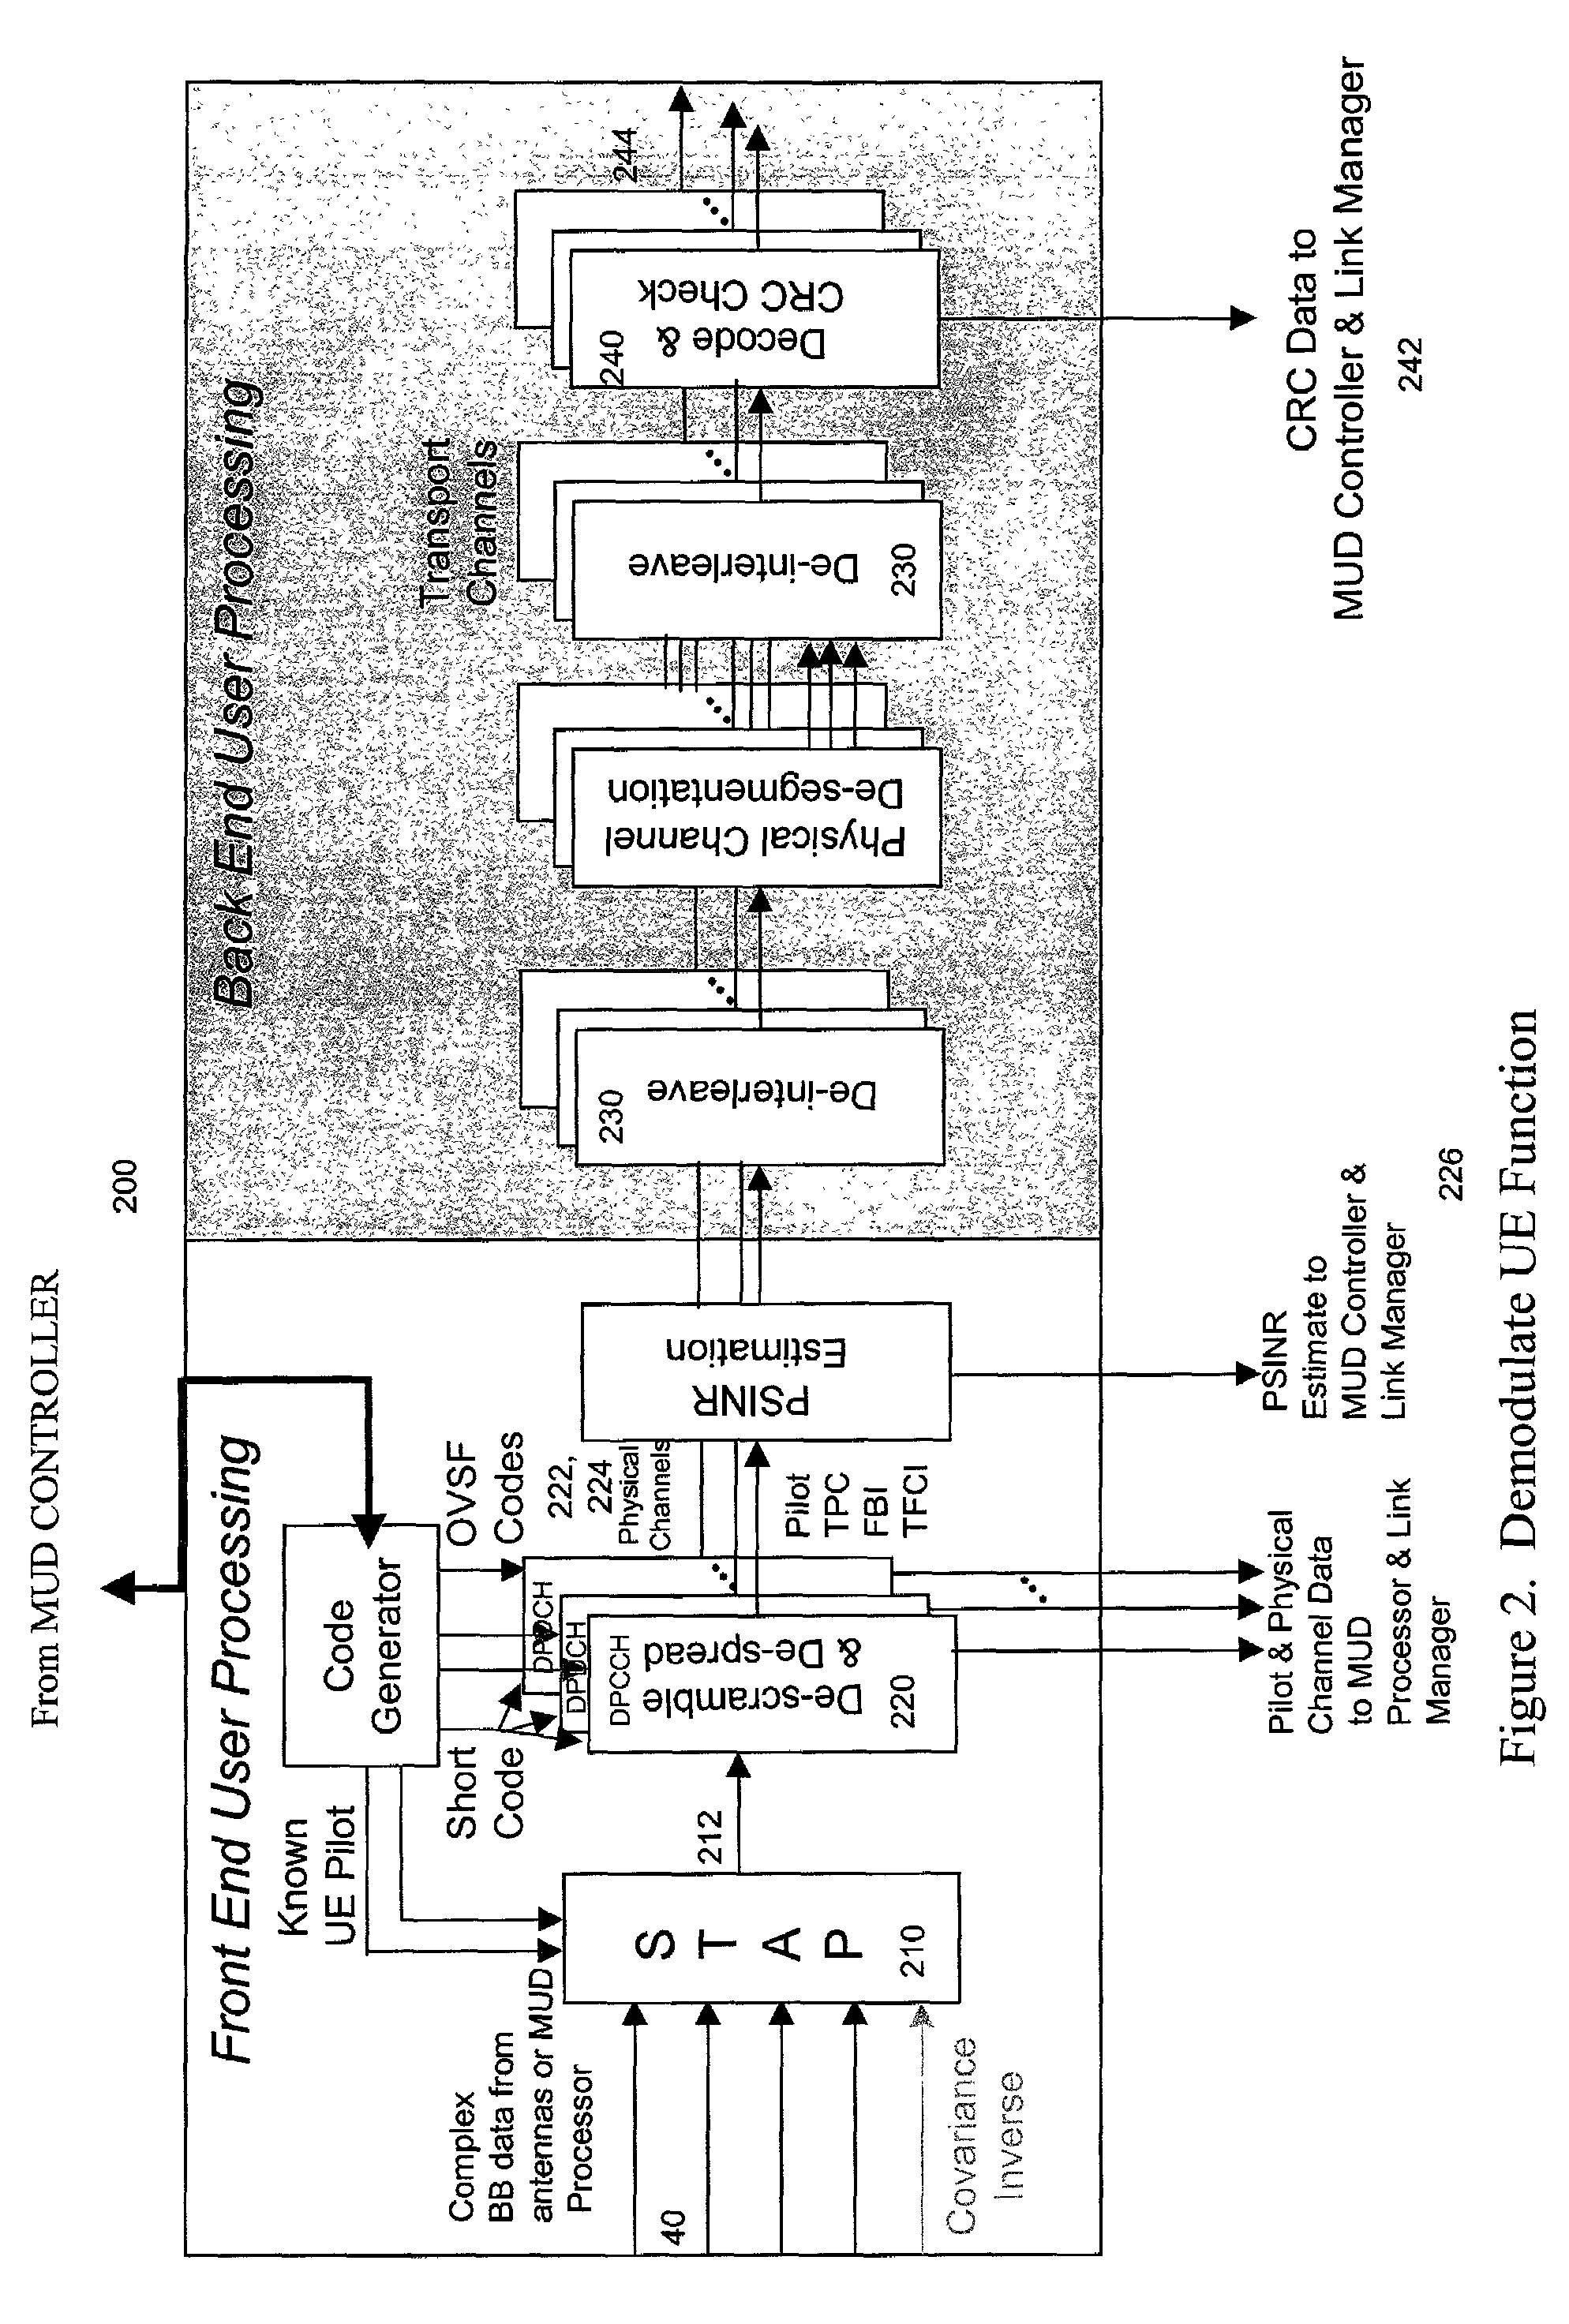 Multistage reception of code division multiple access transmissions